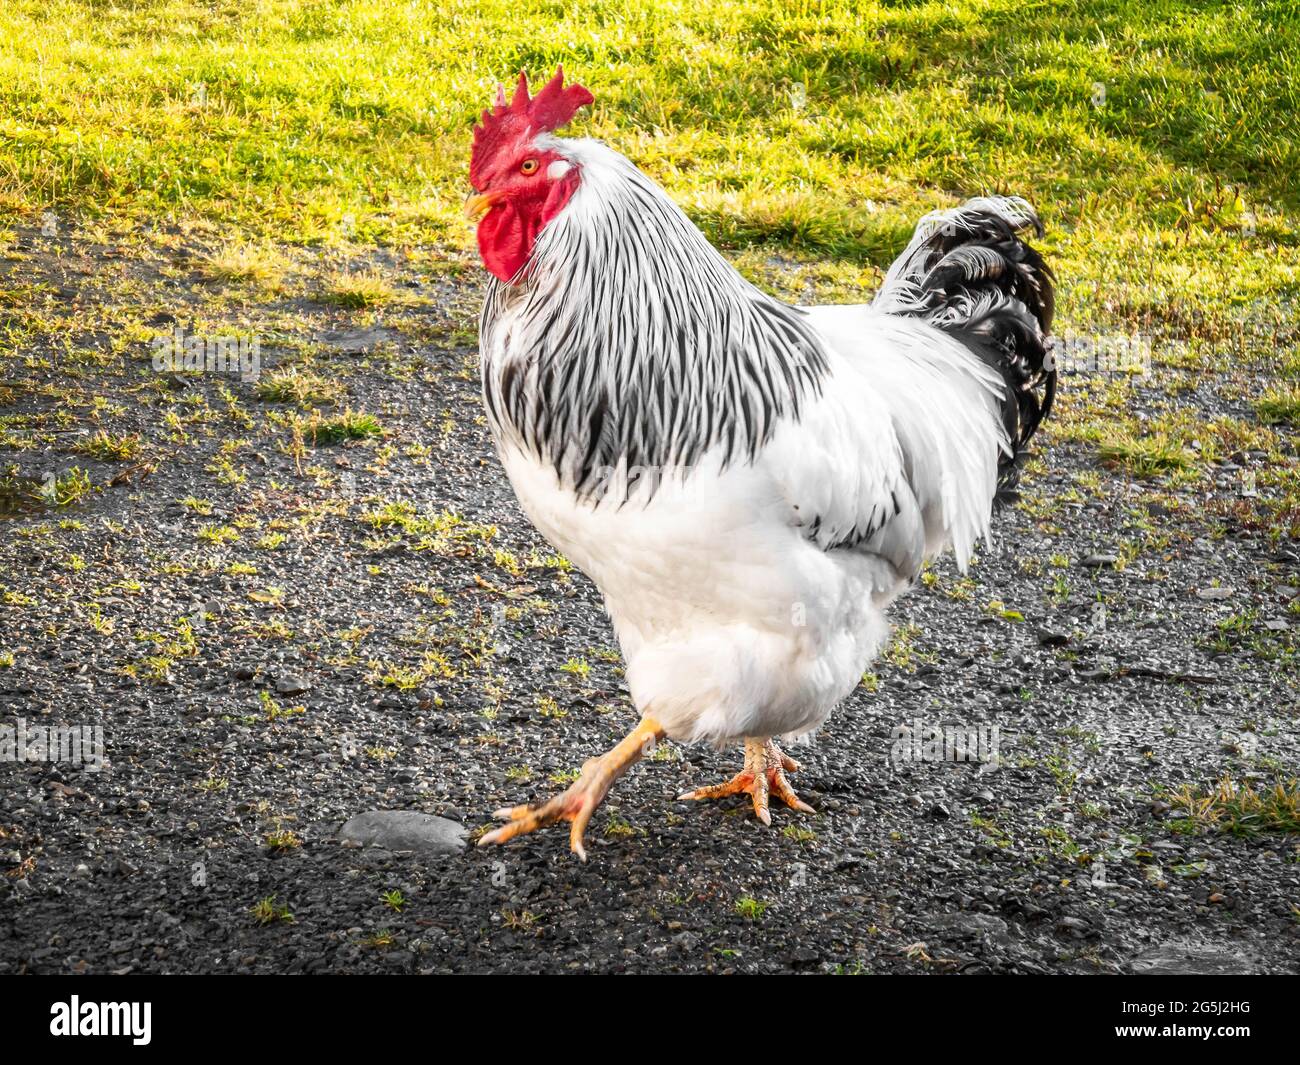 A large healthy free-range cage-free rooster with white and black feathers and red comb walking outside in natural rural green grass summertime Stock Photo